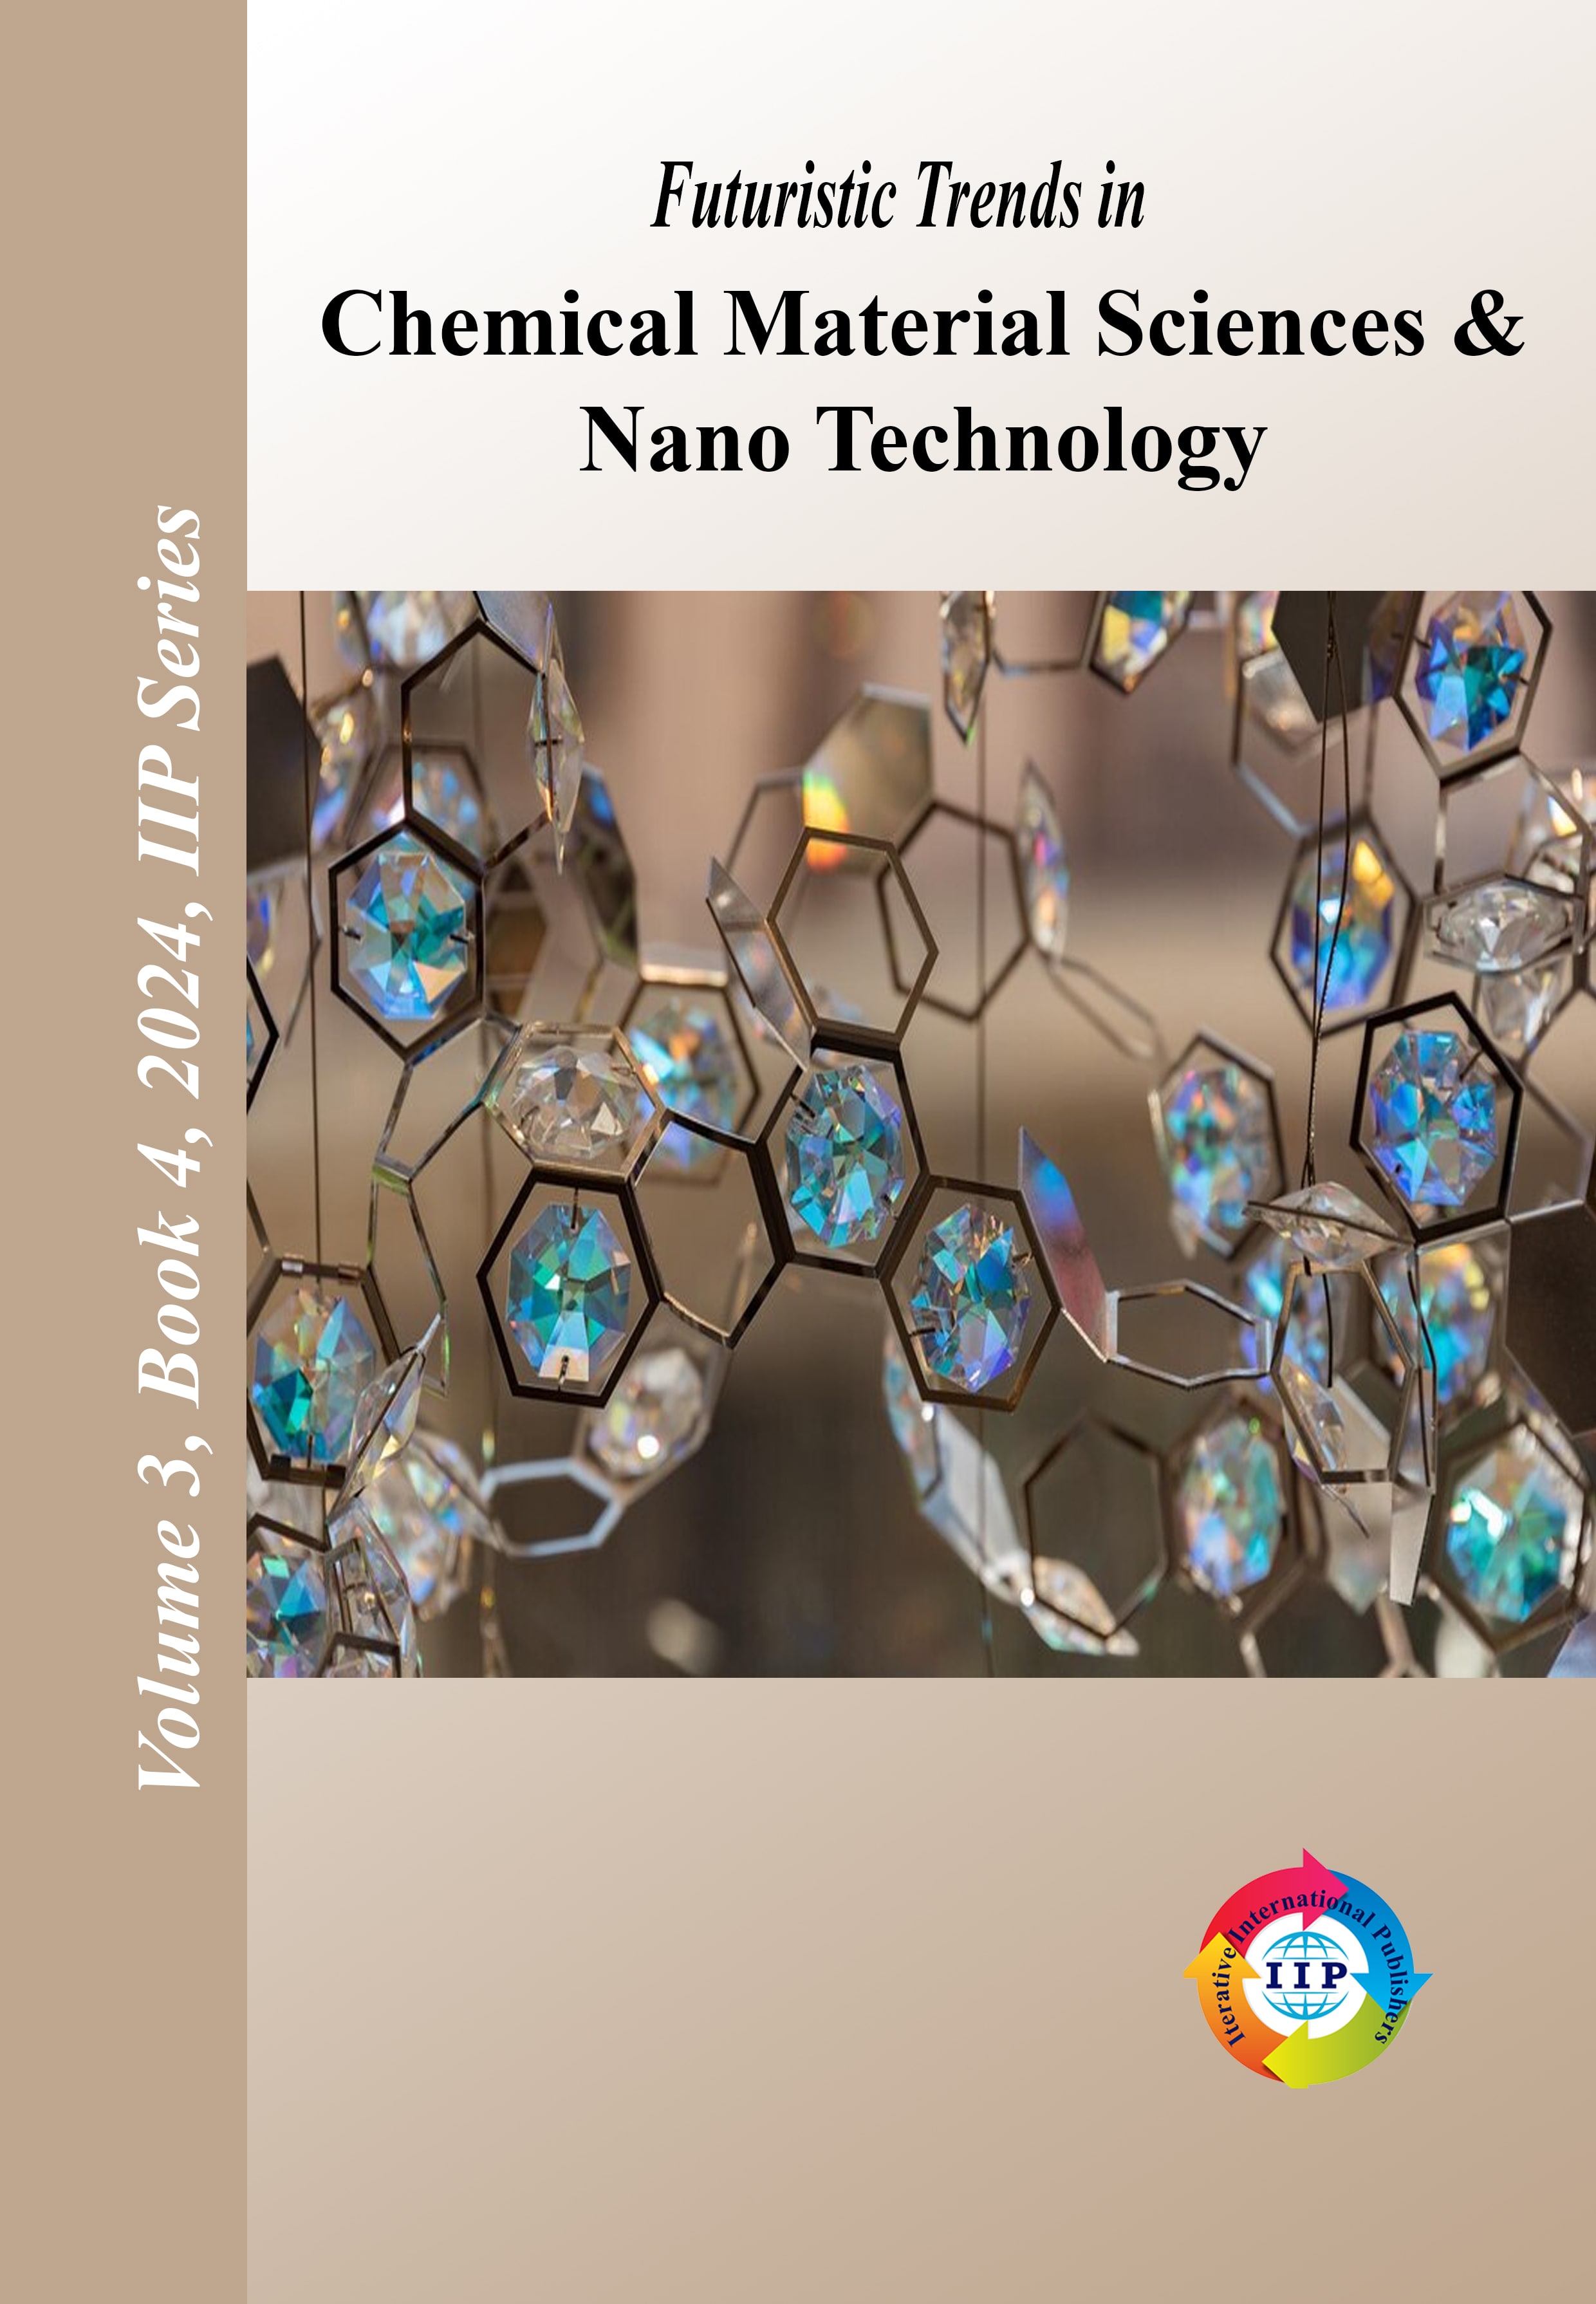 Futuristic Trends in Chemical Material Sciences & Nano Technology  Volume 3 Book 4